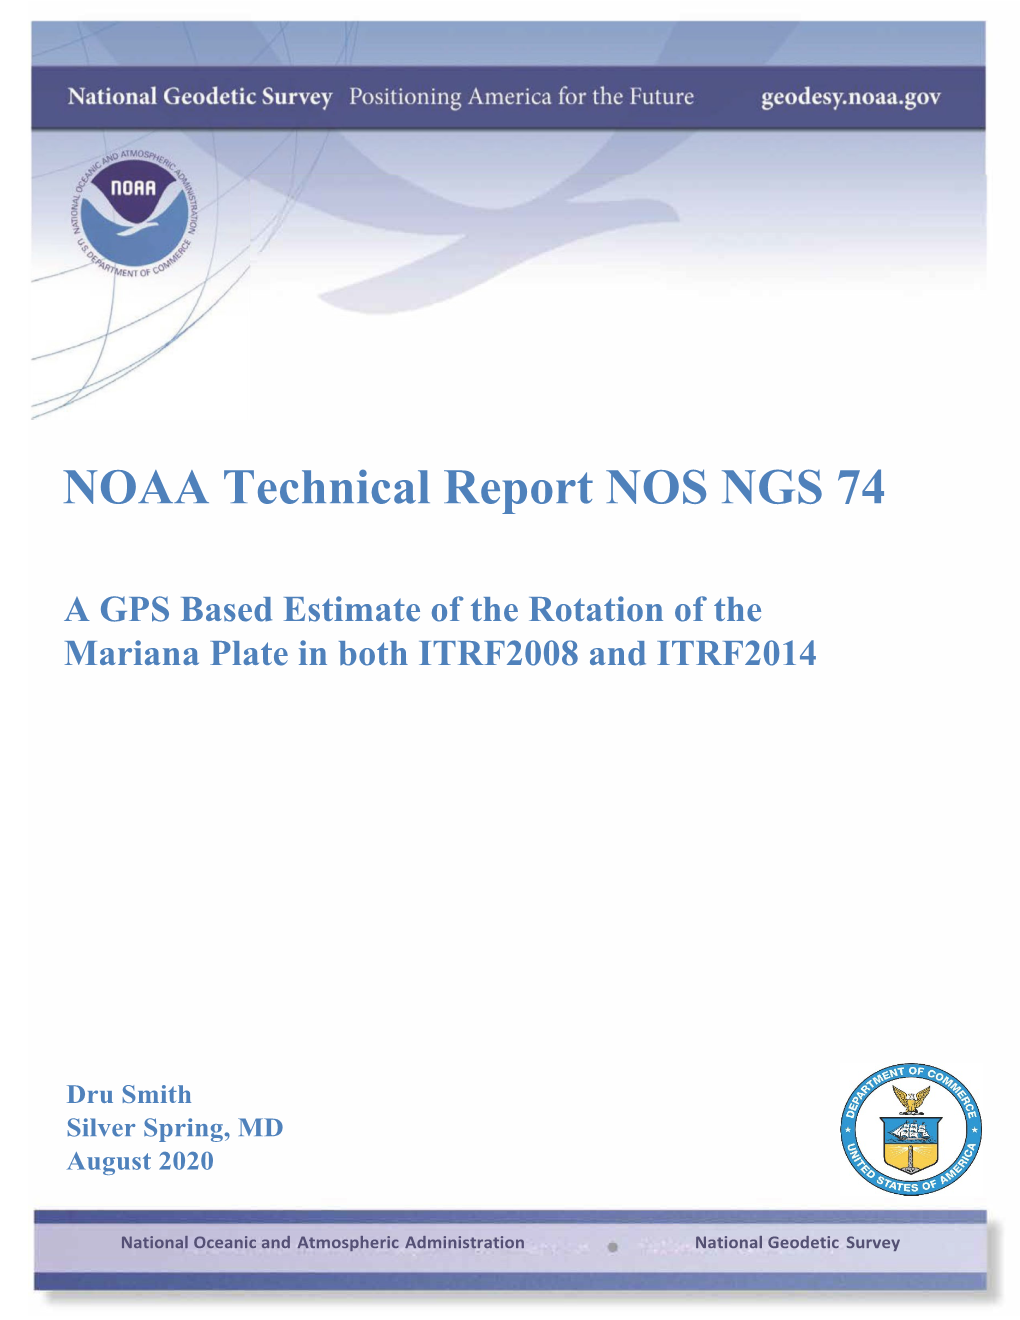 NOAA Technical Report NOS NGS 74 (Rotation